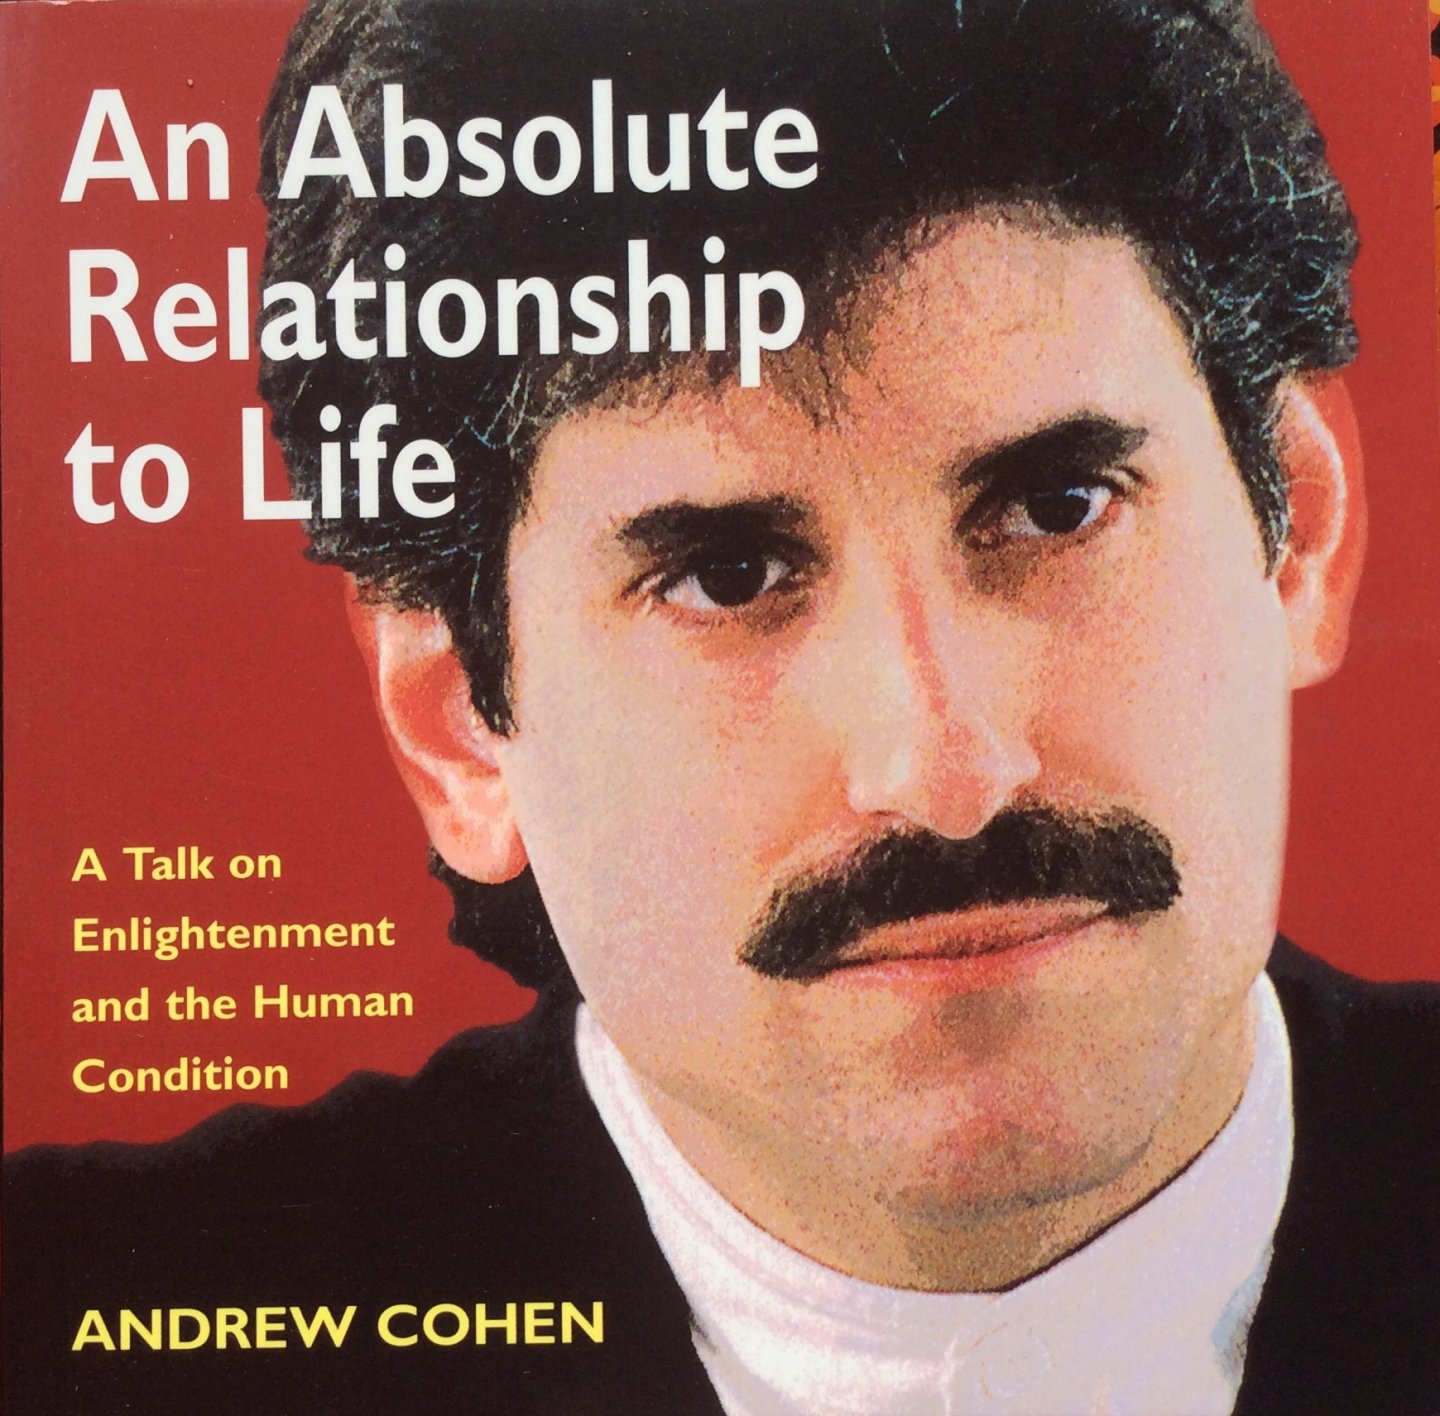 Cohen, Andrew - An absolute relationship to life; a talk on enlightenment and the human condition